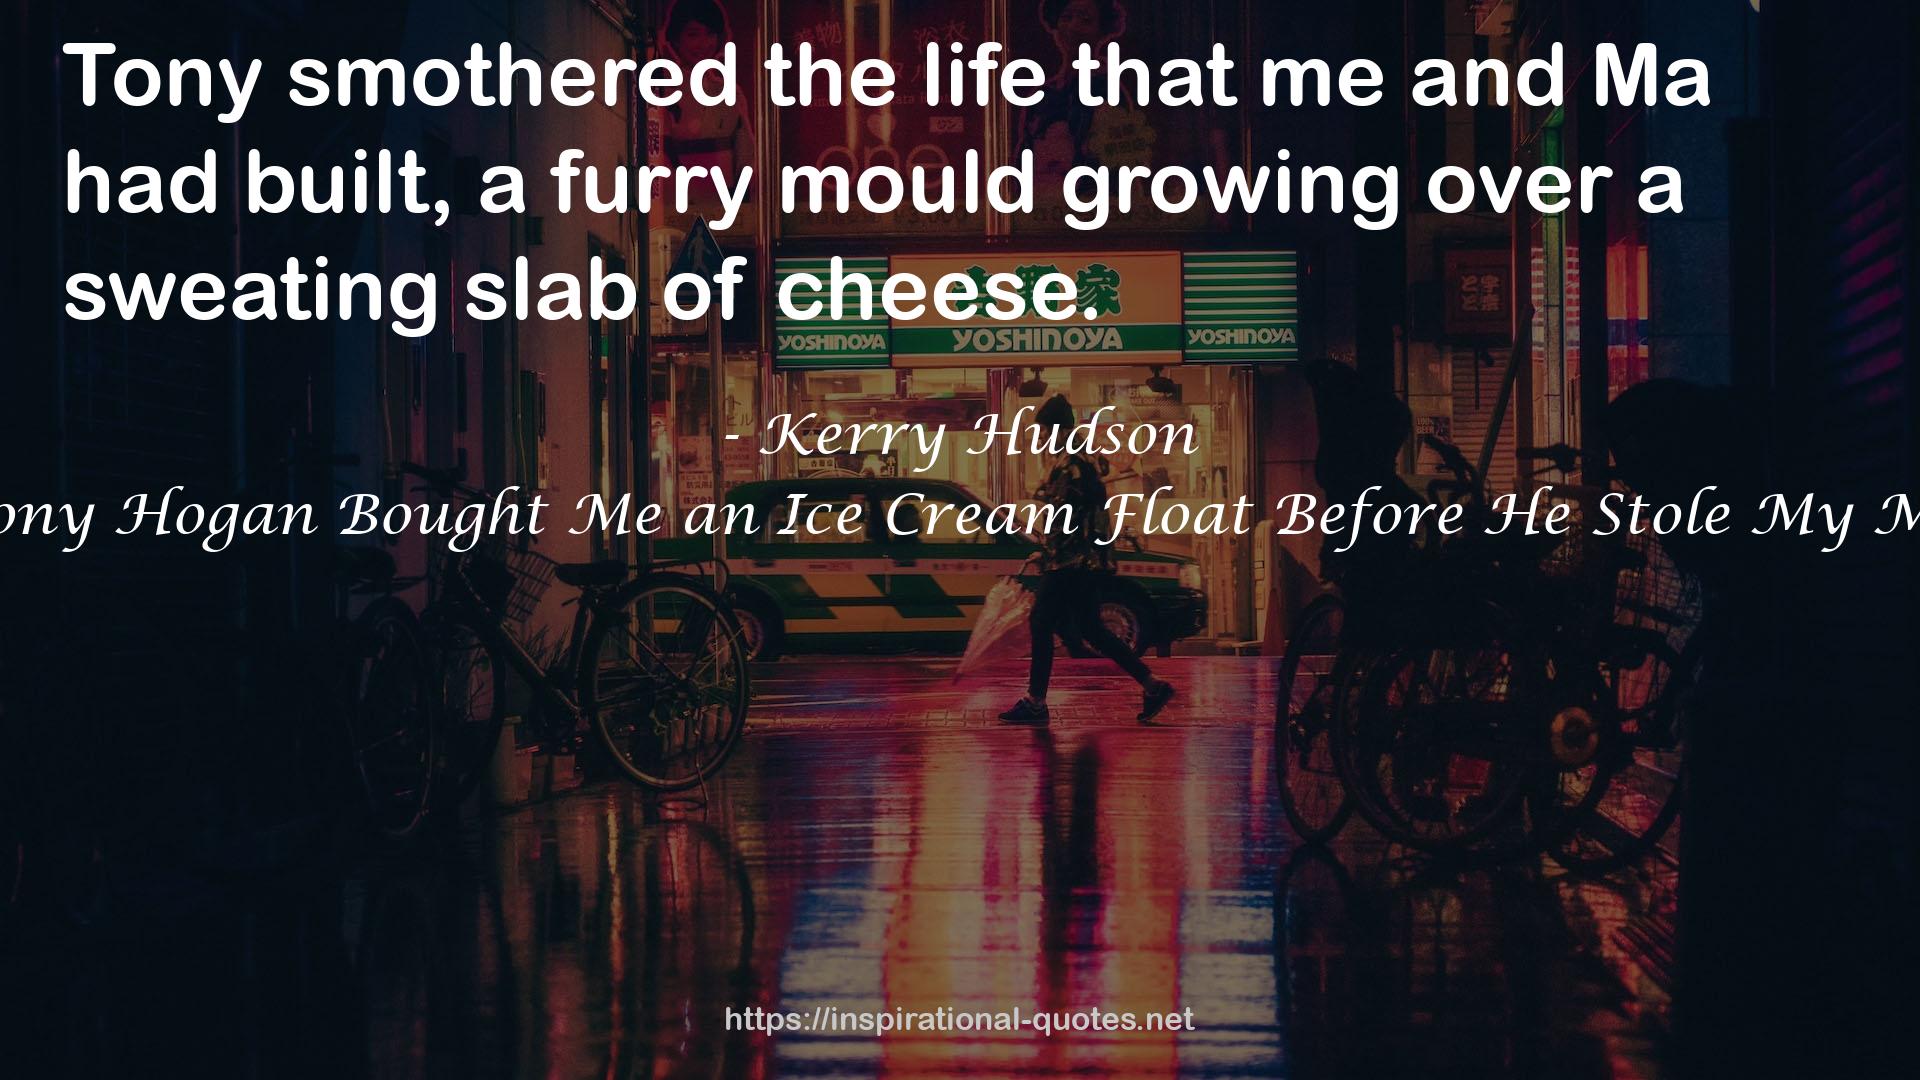 Kerry Hudson QUOTES